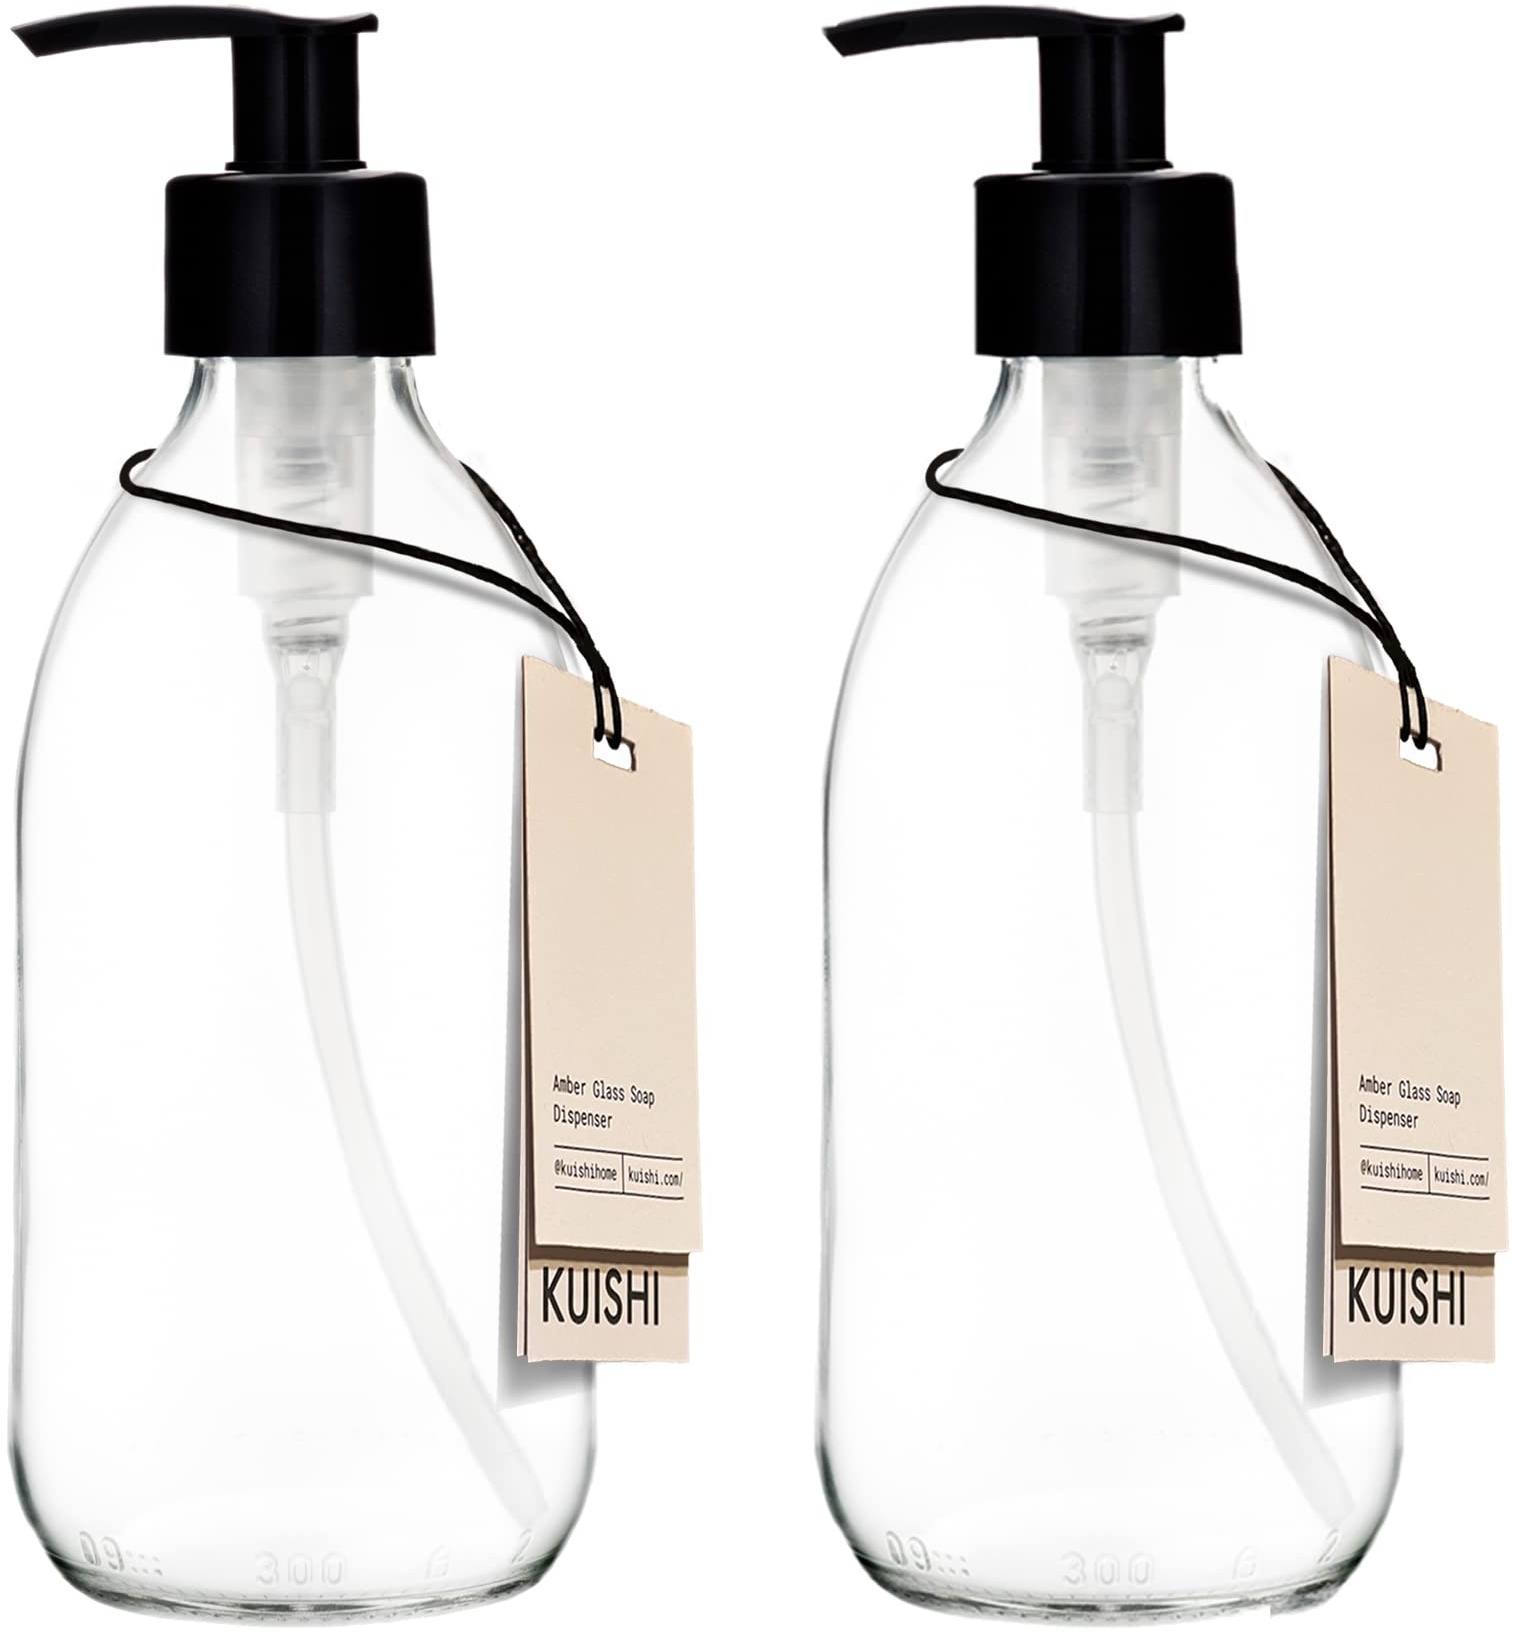 Kuishi Clear Glass Soap Dispenser with Pump [250ml Pack of 2], Clear Soap Dispenser with Black Plastic Pump (BPA Free), Glass Shampoo Bottles Ideal for Handwash, Conditioner, Shower Gel